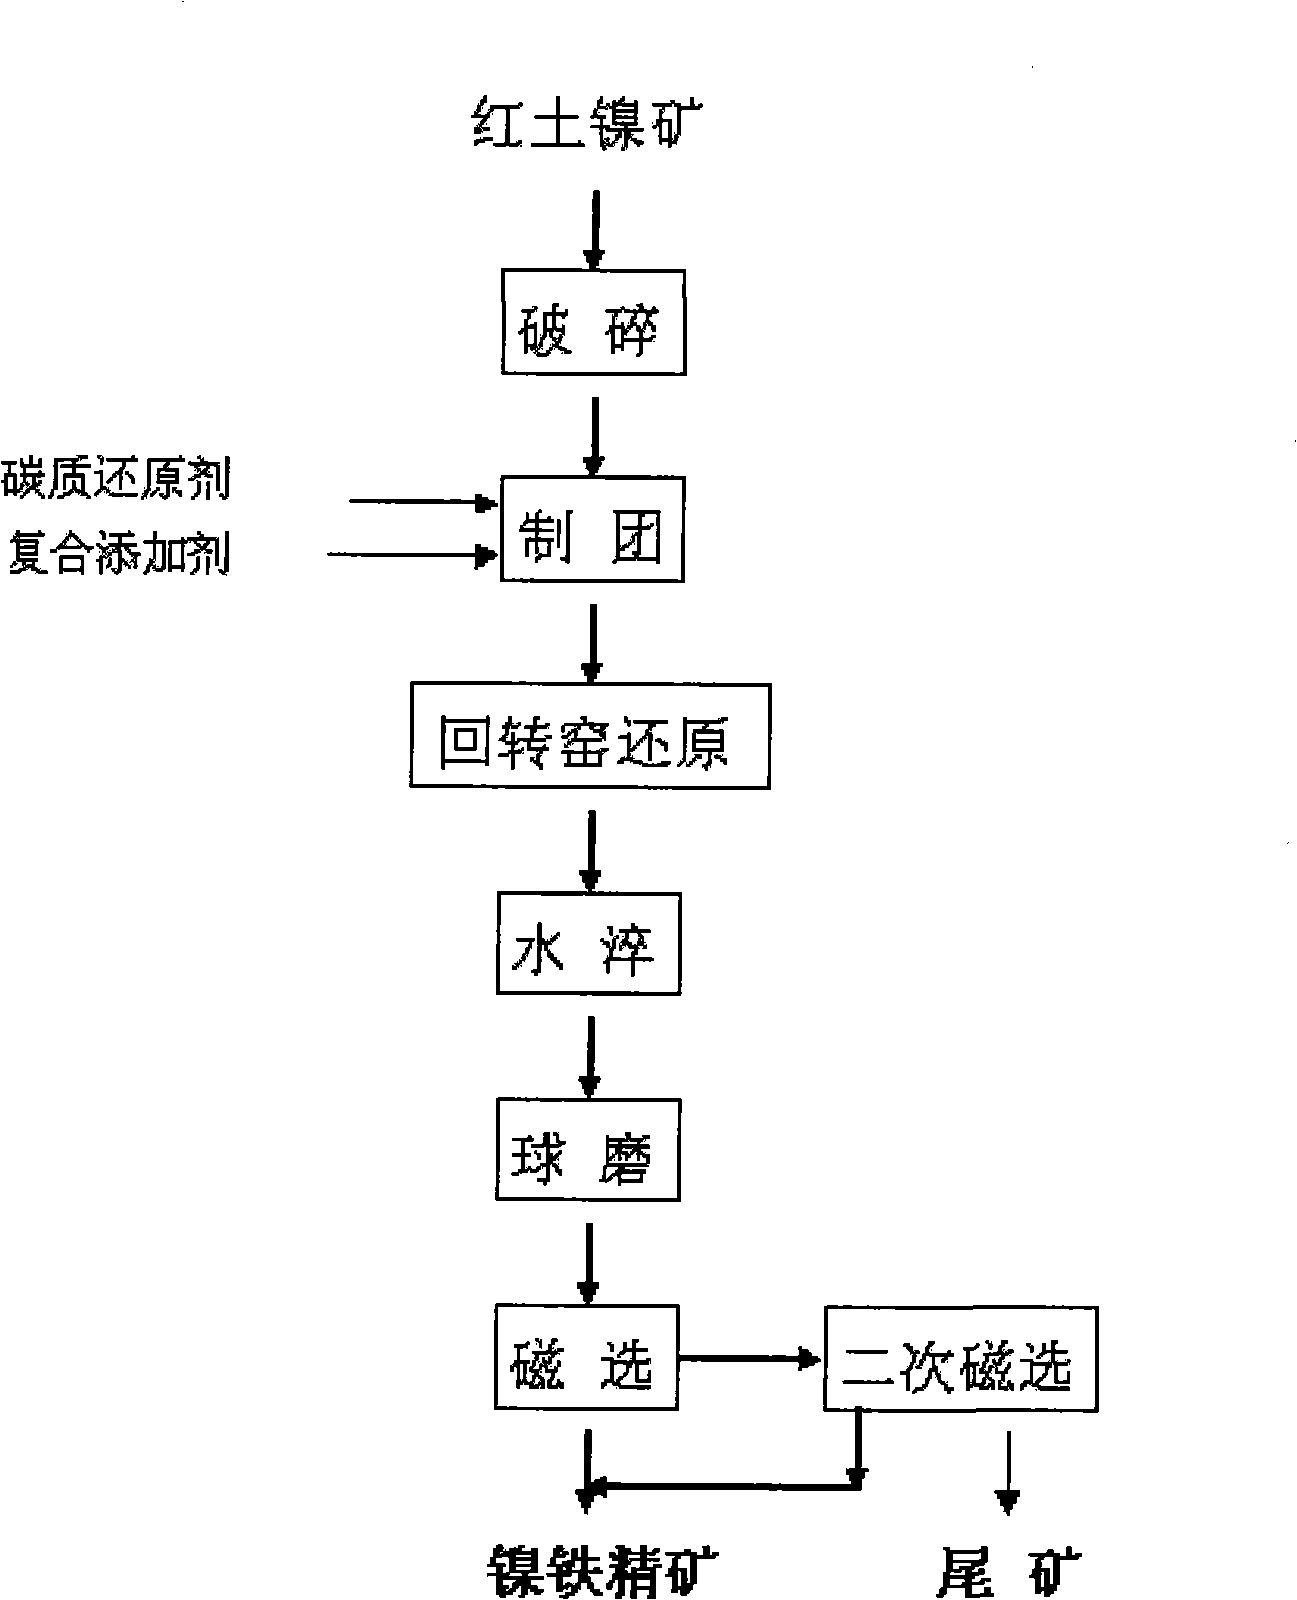 Method for enriching nickel iron ore concentrate from laterite type nickel ore by means of rotary kiln